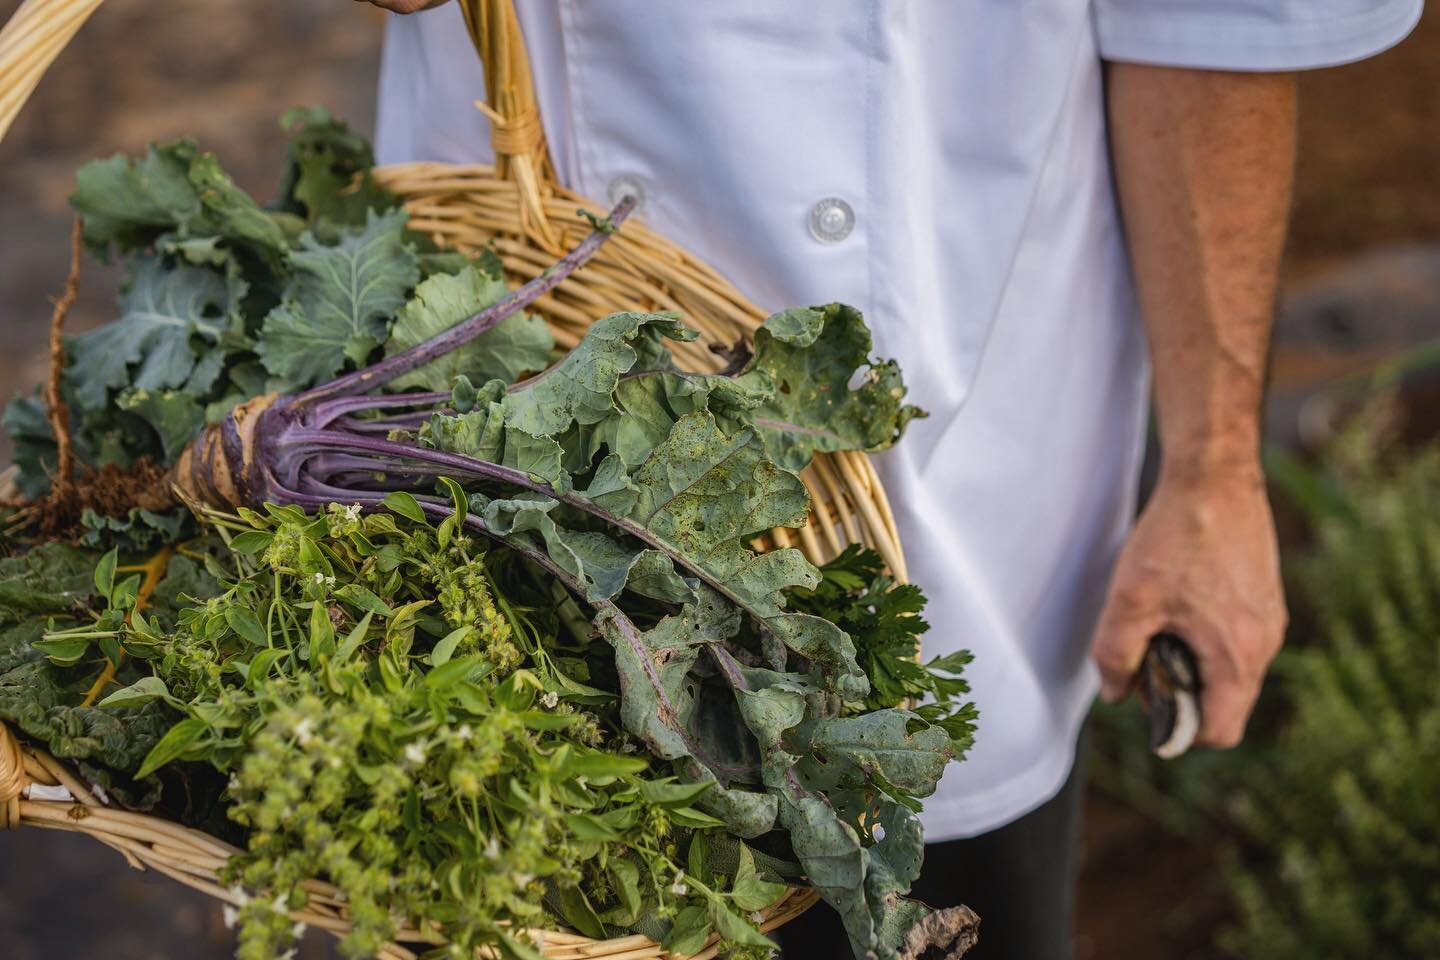 when we say only the freshest ingredients, we mean it. #farmtotable #fromthegardentothetable #thekentuckycastle